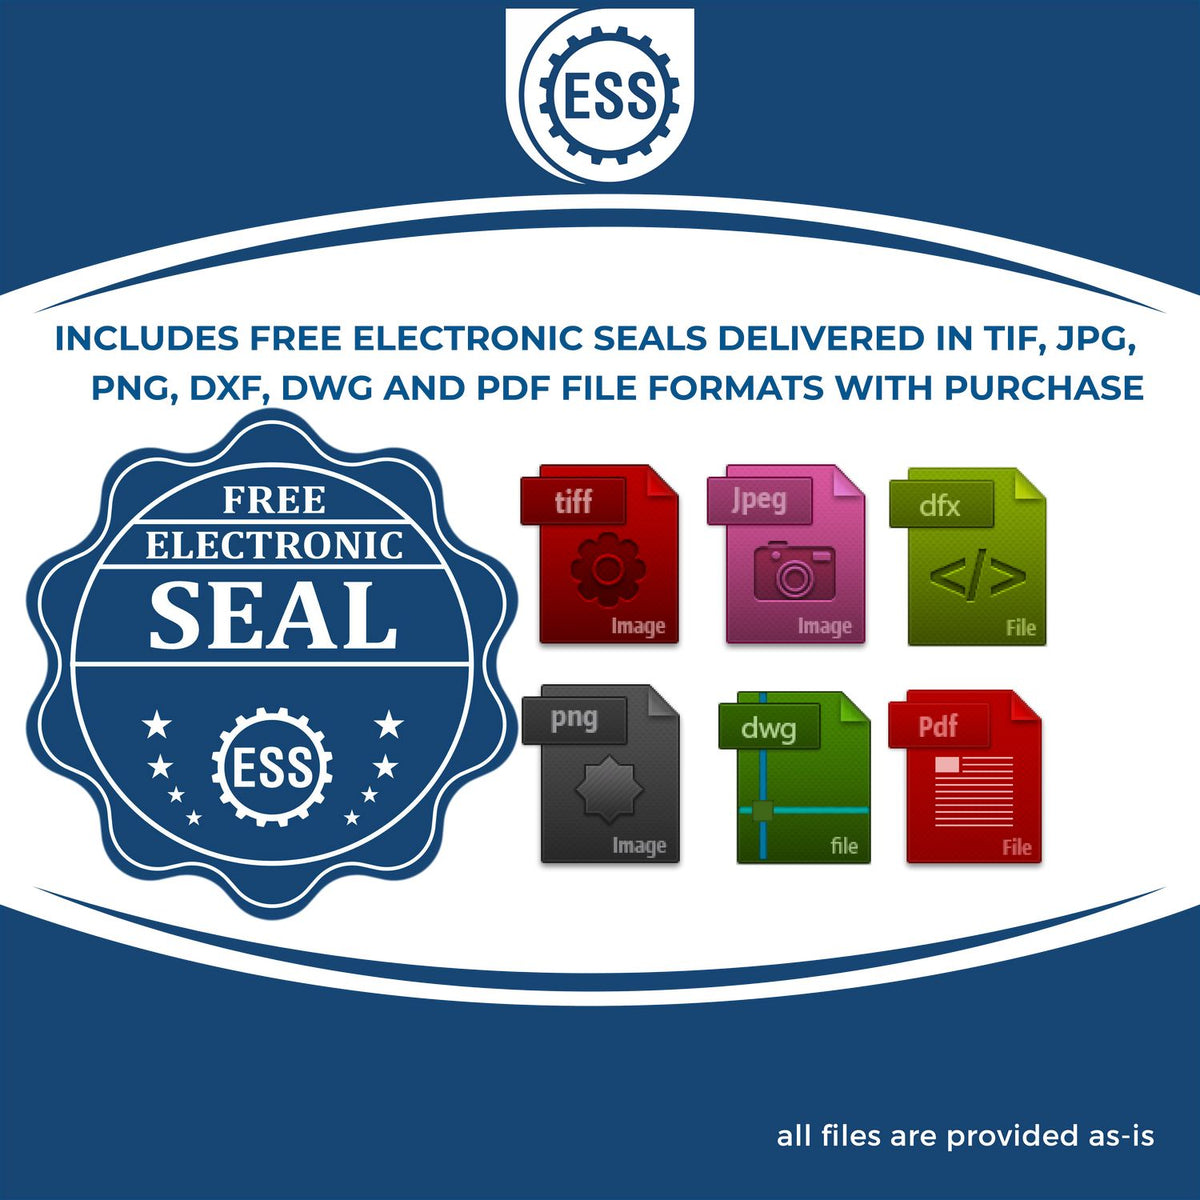 An infographic for the free electronic seal for the Slim Pre-Inked Maryland Professional Geologist Seal Stamp illustrating the different file type icons such as DXF, DWG, TIF, JPG and PNG.